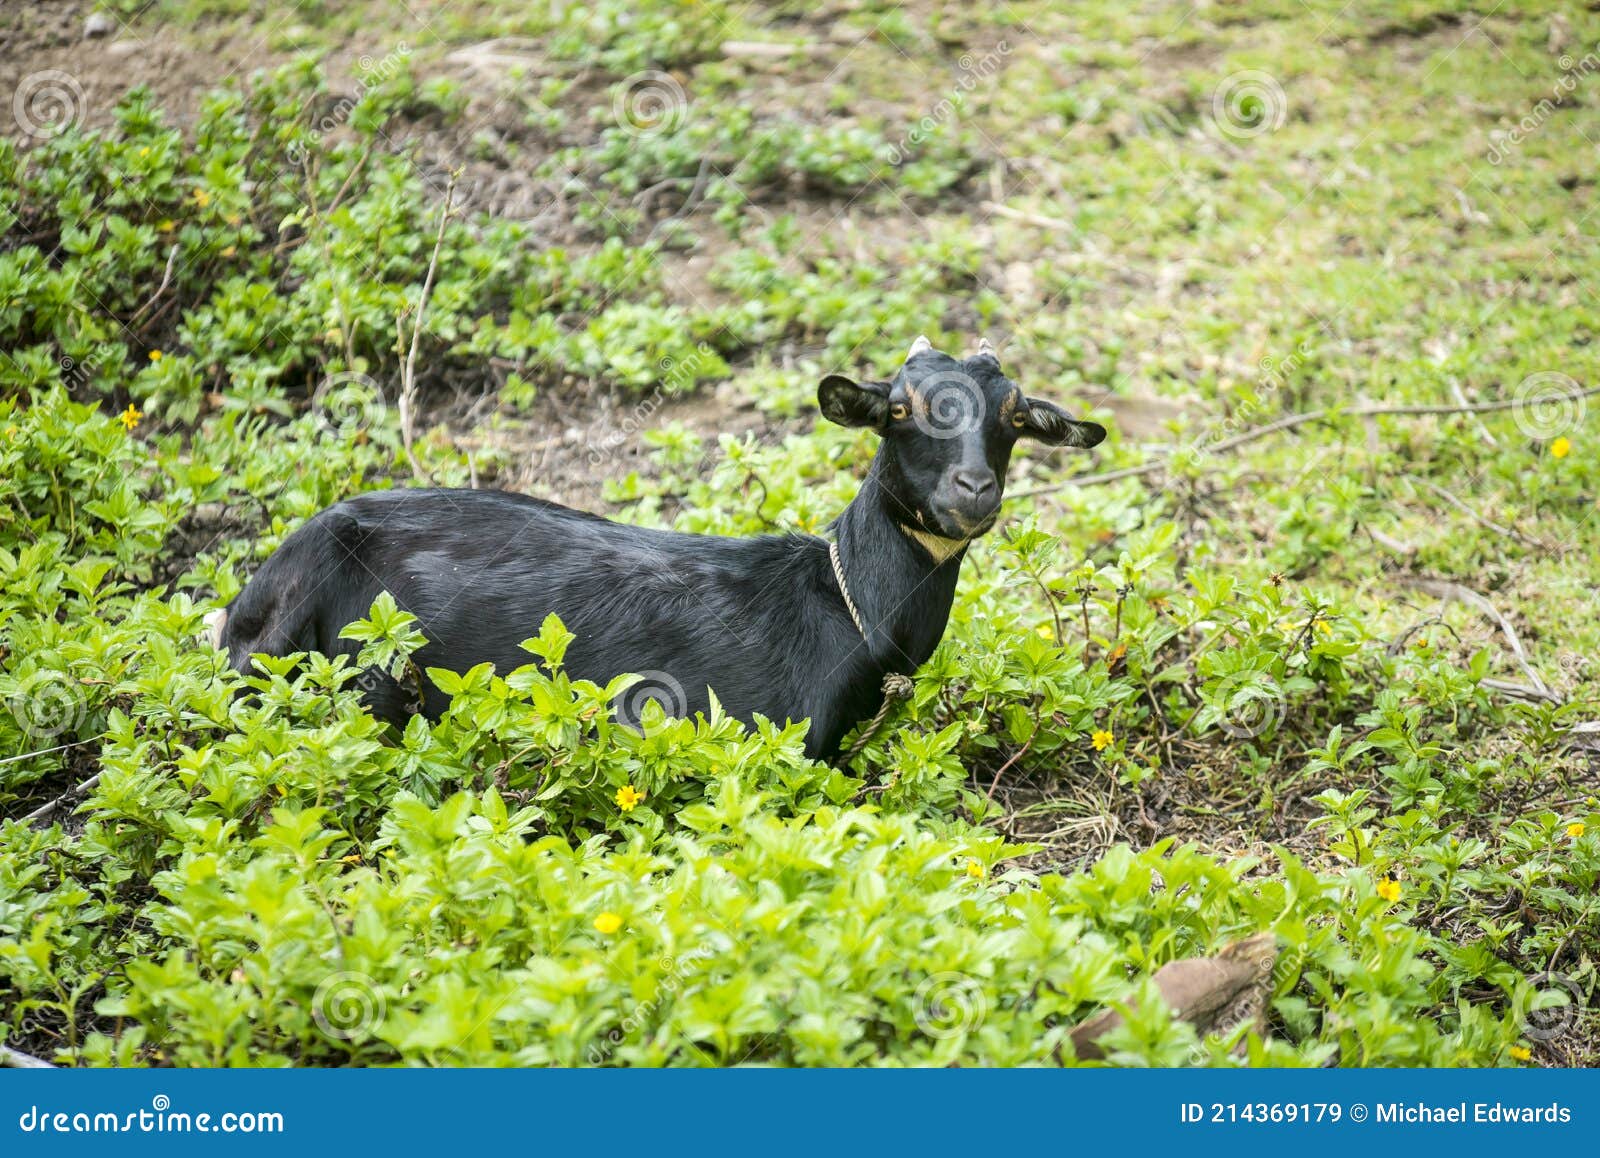 A Goat with a Rope Tied To Its Neck To Keep it from Going Far in a  Mountainous Rural Village. Small Scale Animal Husbandry. Stock Image -  Image of local, husbandry: 214369179